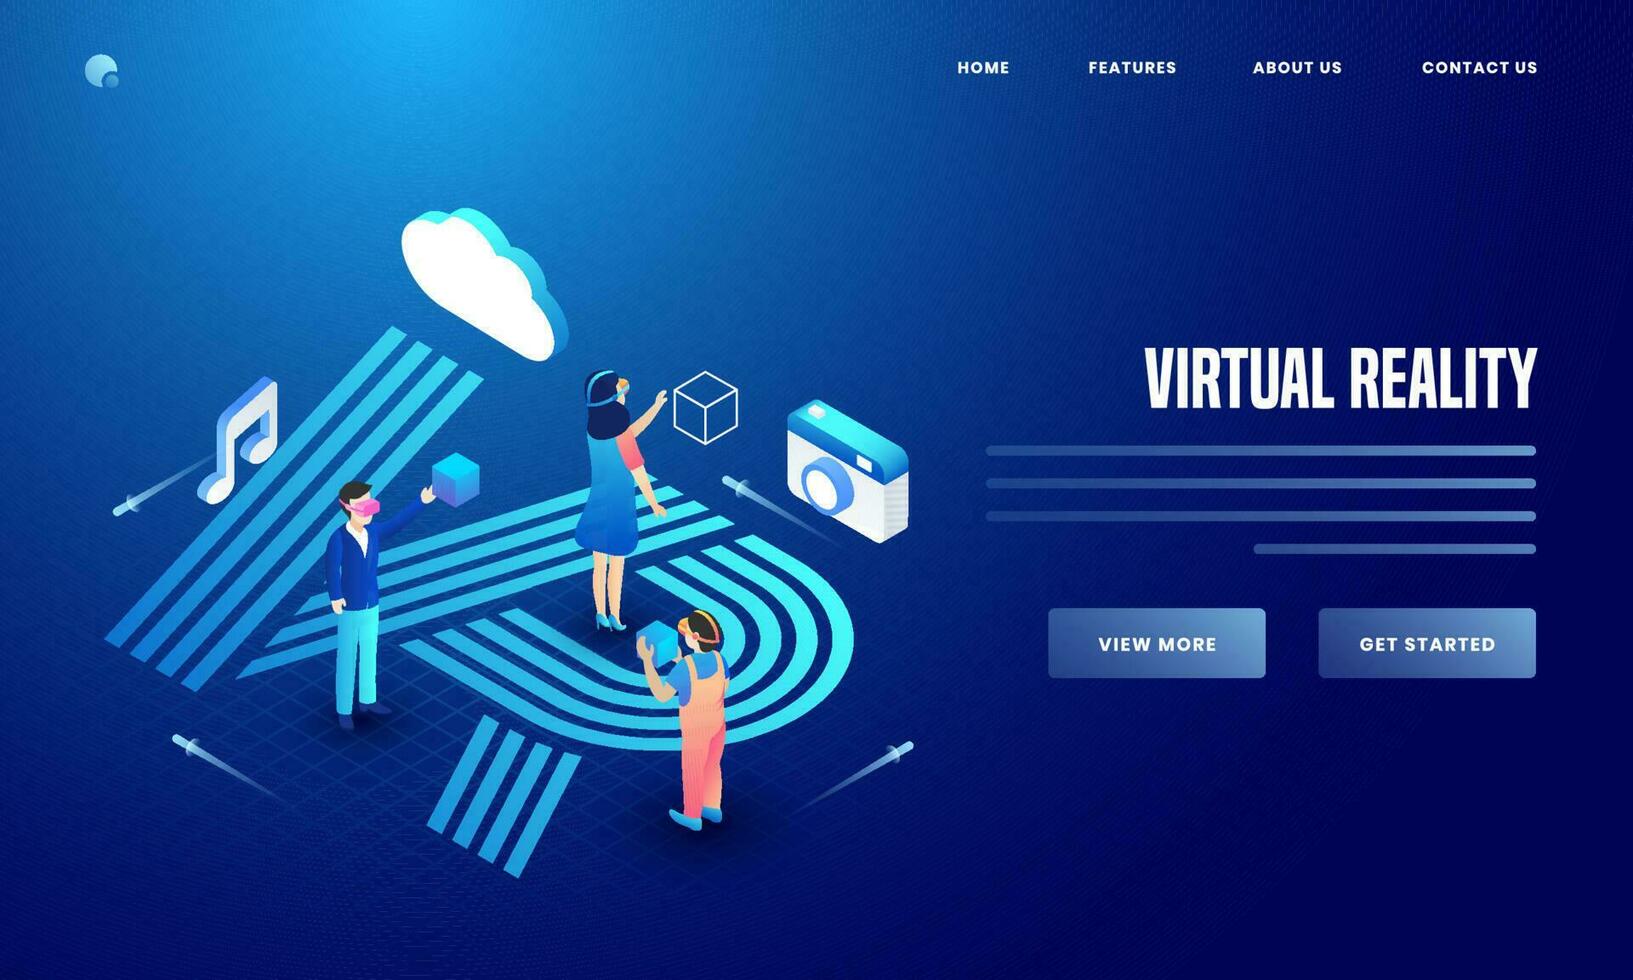 User using social media and analytics tools of camera, cloud and music notes on creative blue background for Virtual Reality website poster or landing page design. vector